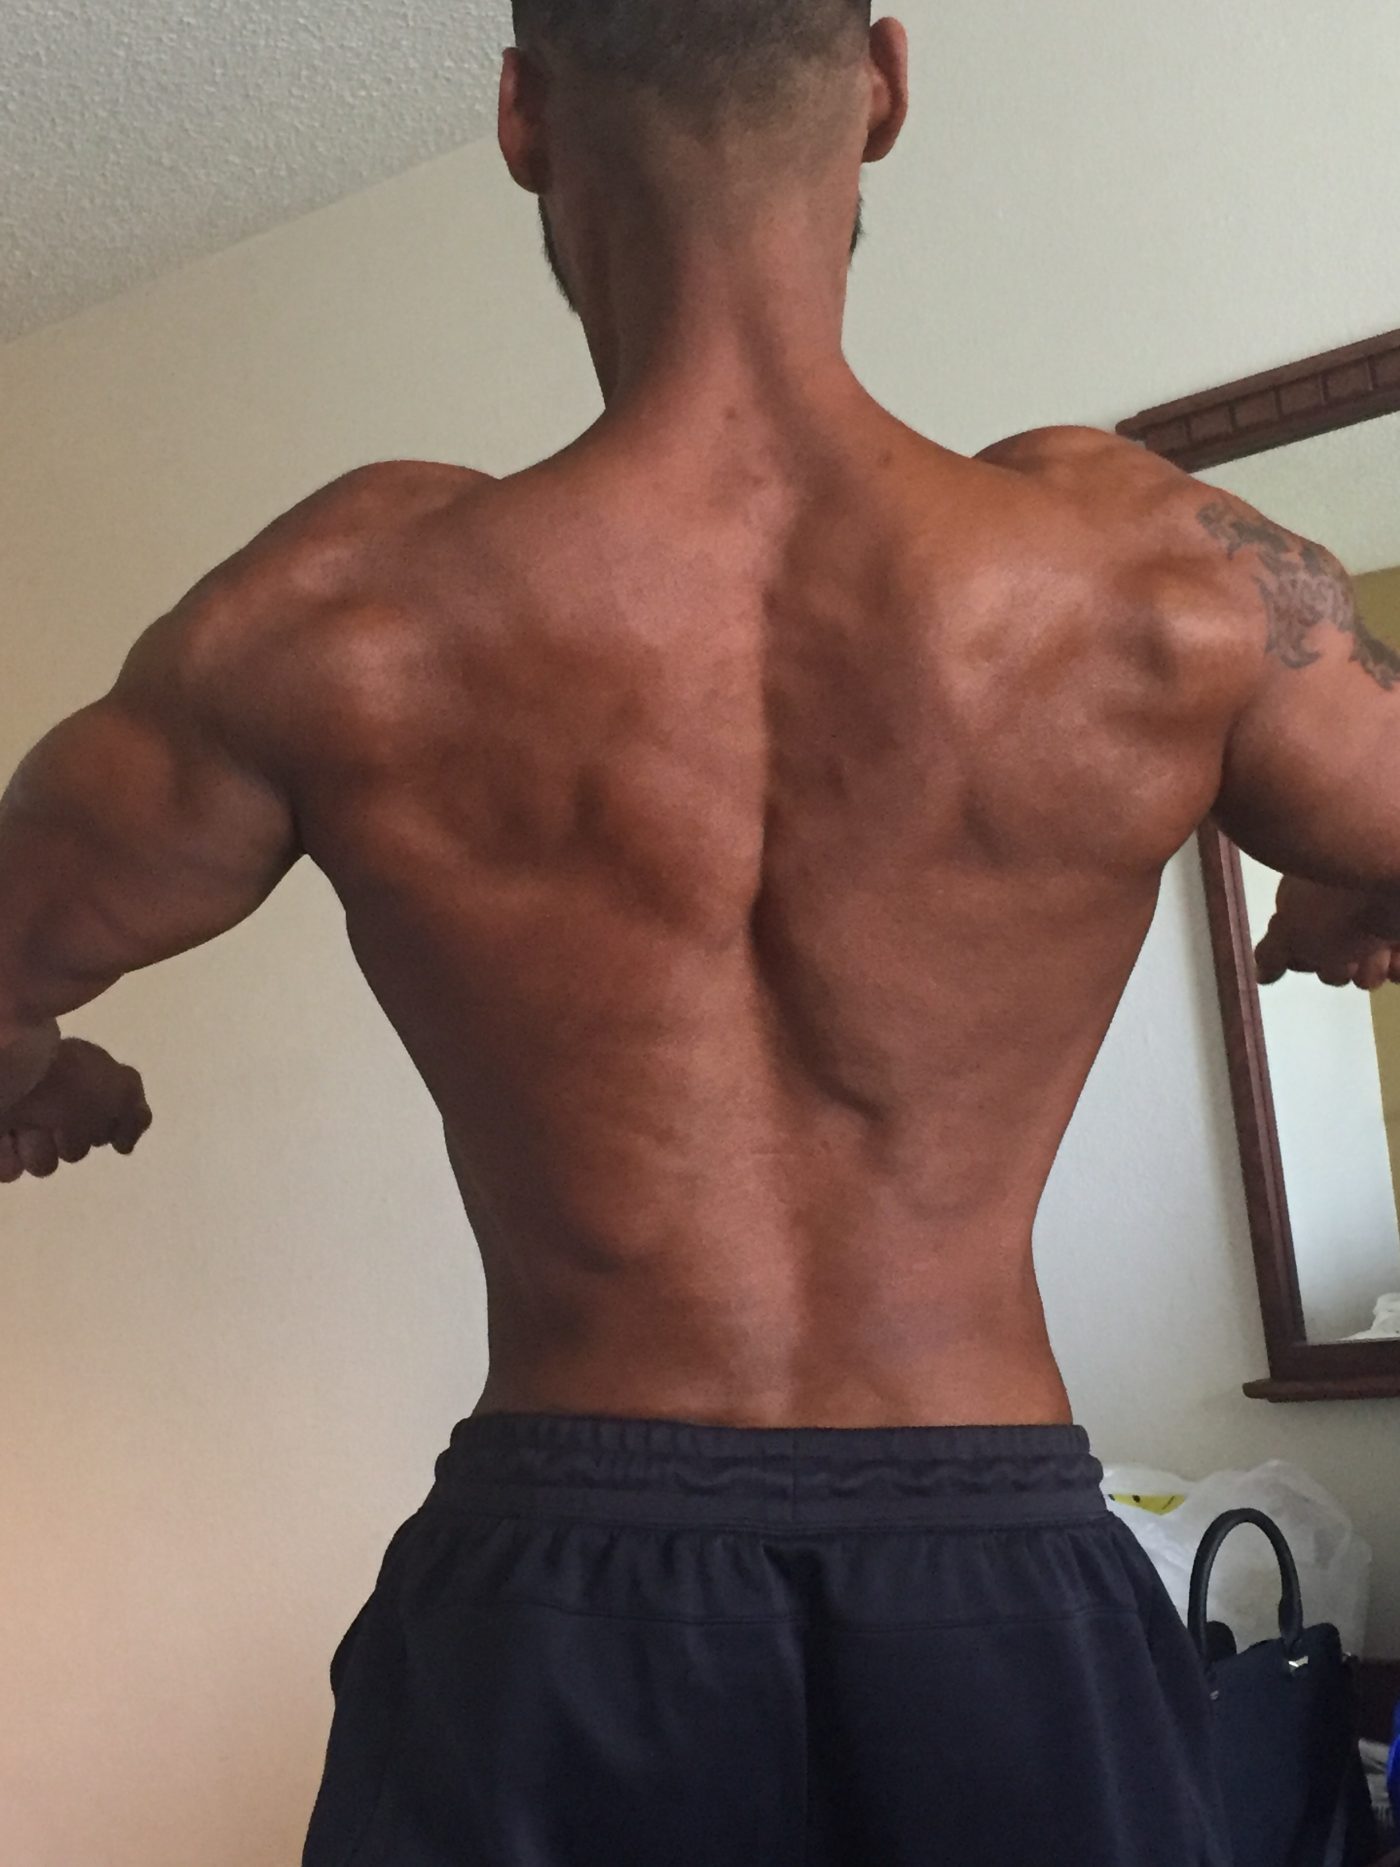 Diego showing off his back in his hotel room